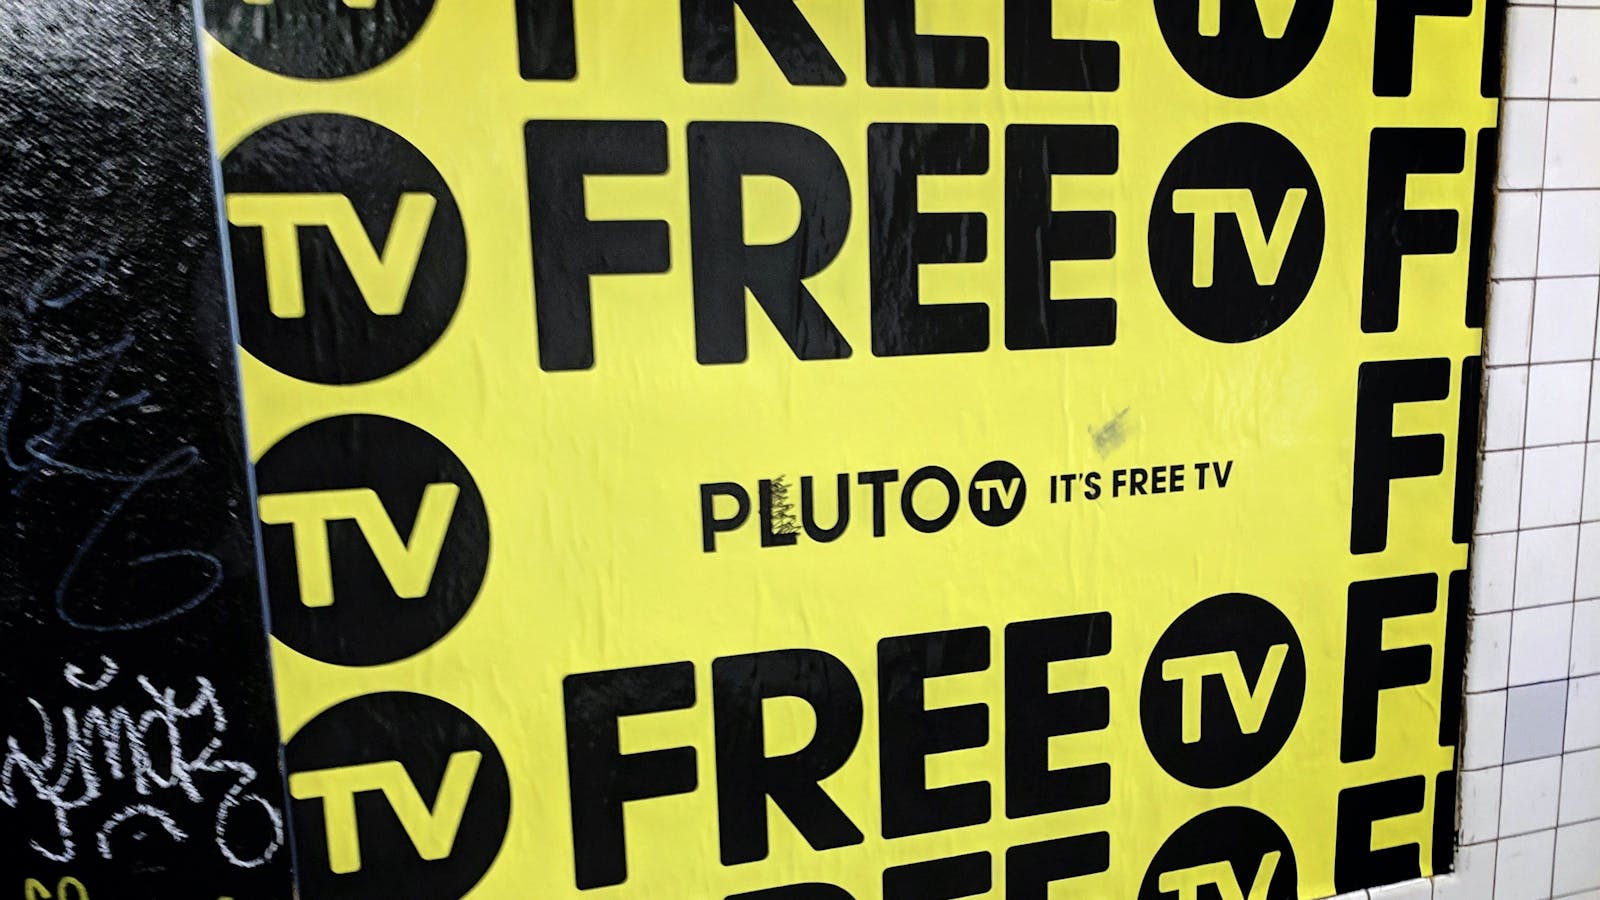 An ad for Viacom's Pluto TV service on a New York subway wall earlier this year. Photo by AP